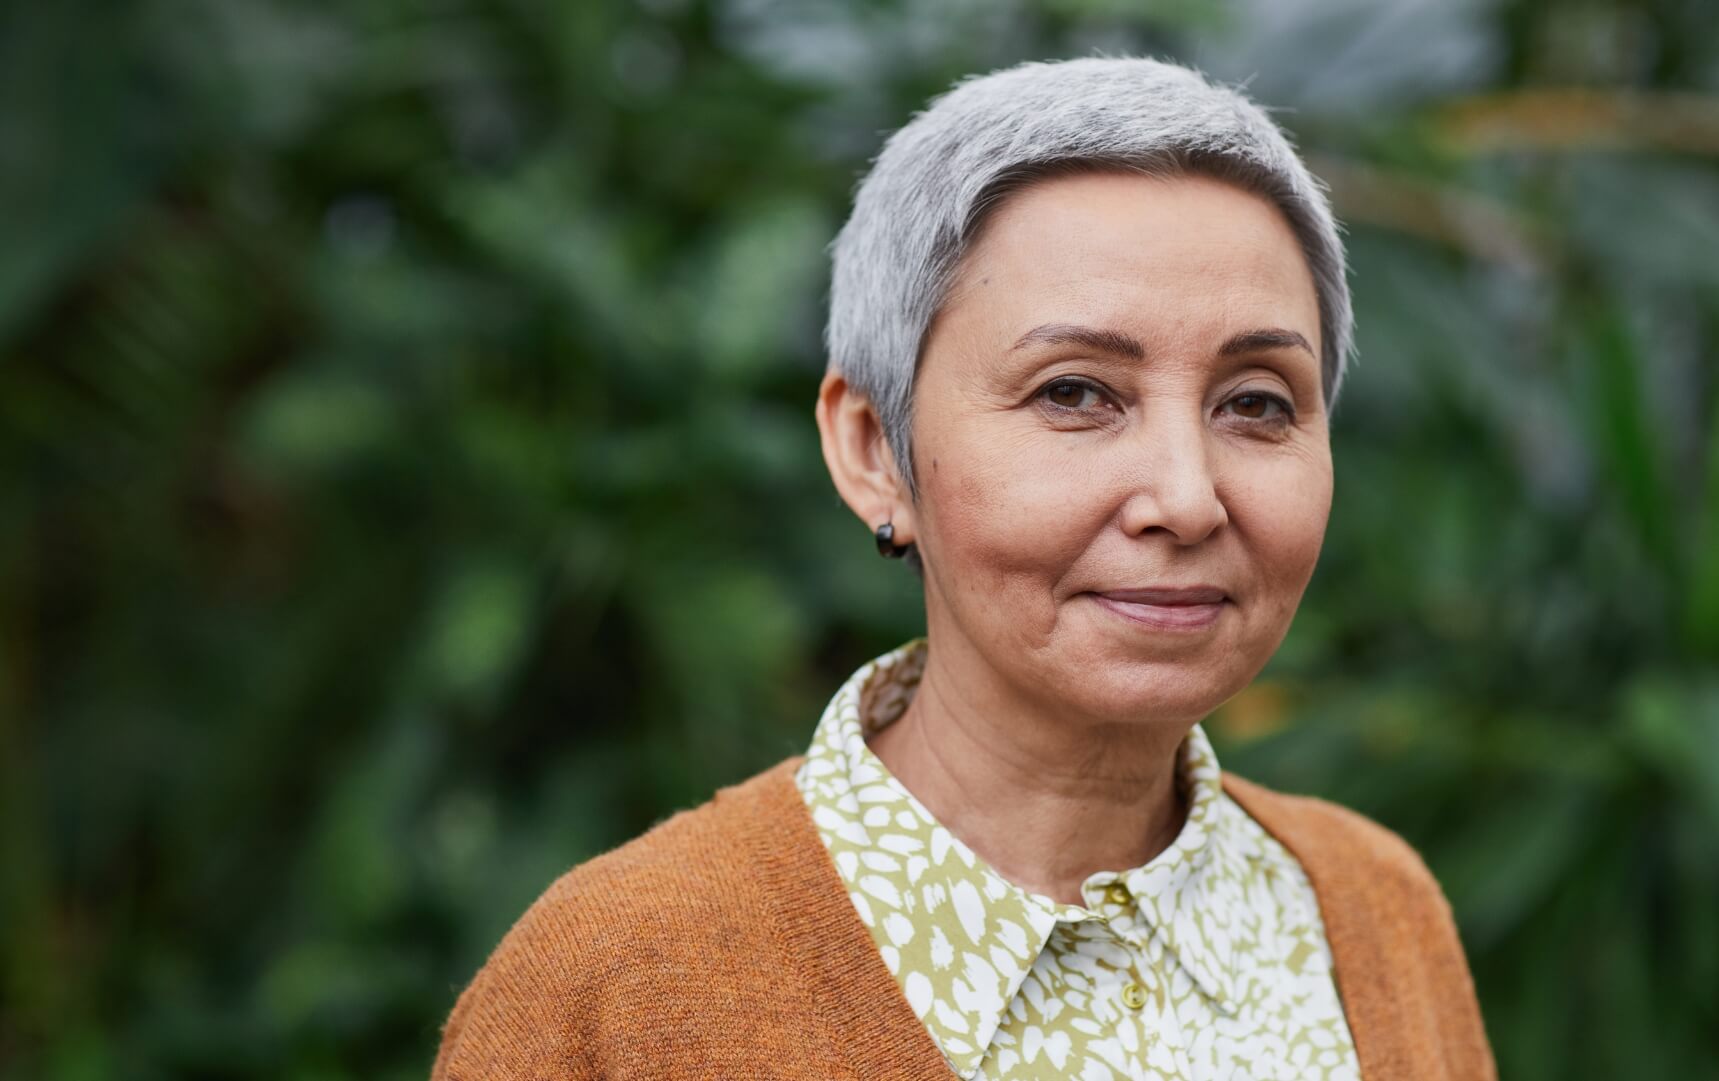 Woman with short gray hair smiling to the camera